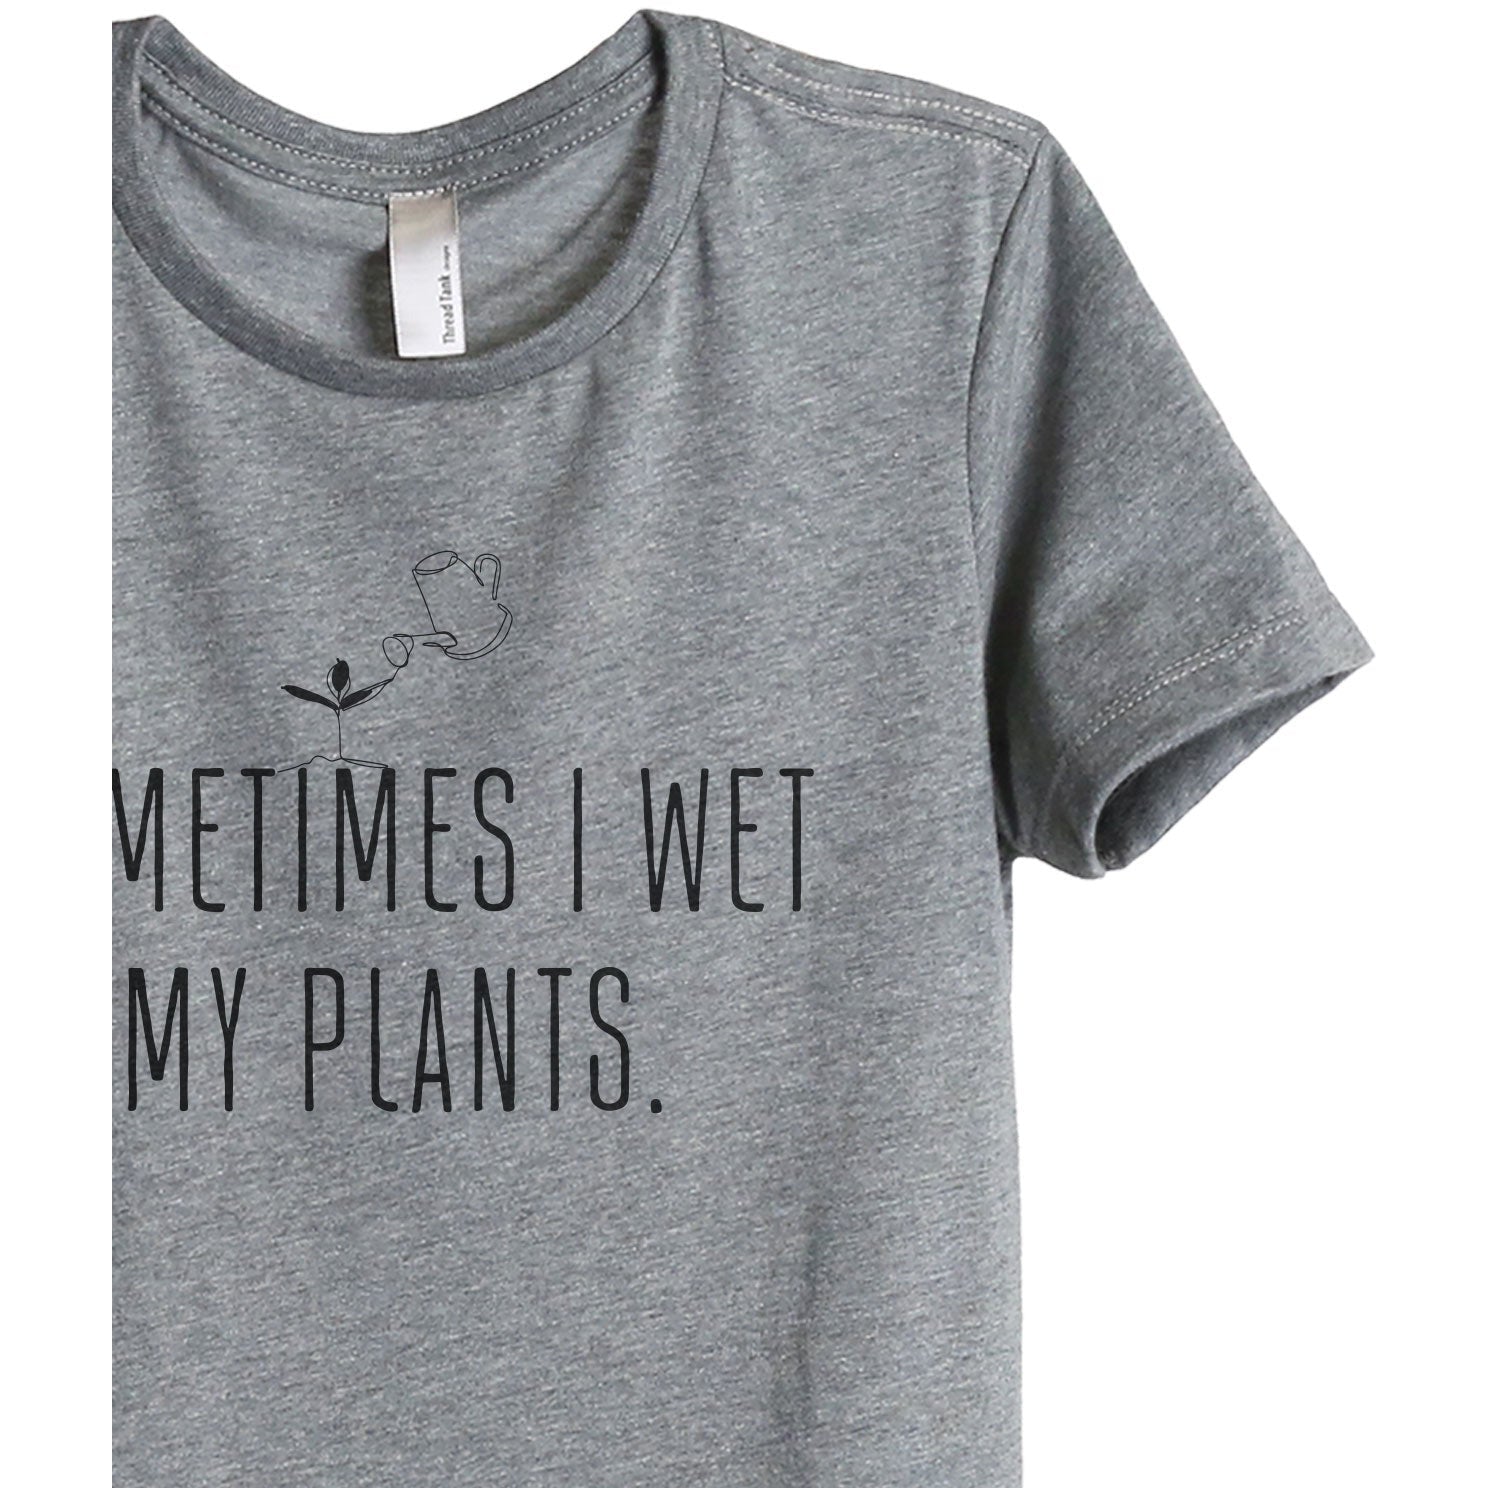 Sometimes I Wet My Plants - Stories You Can Wear